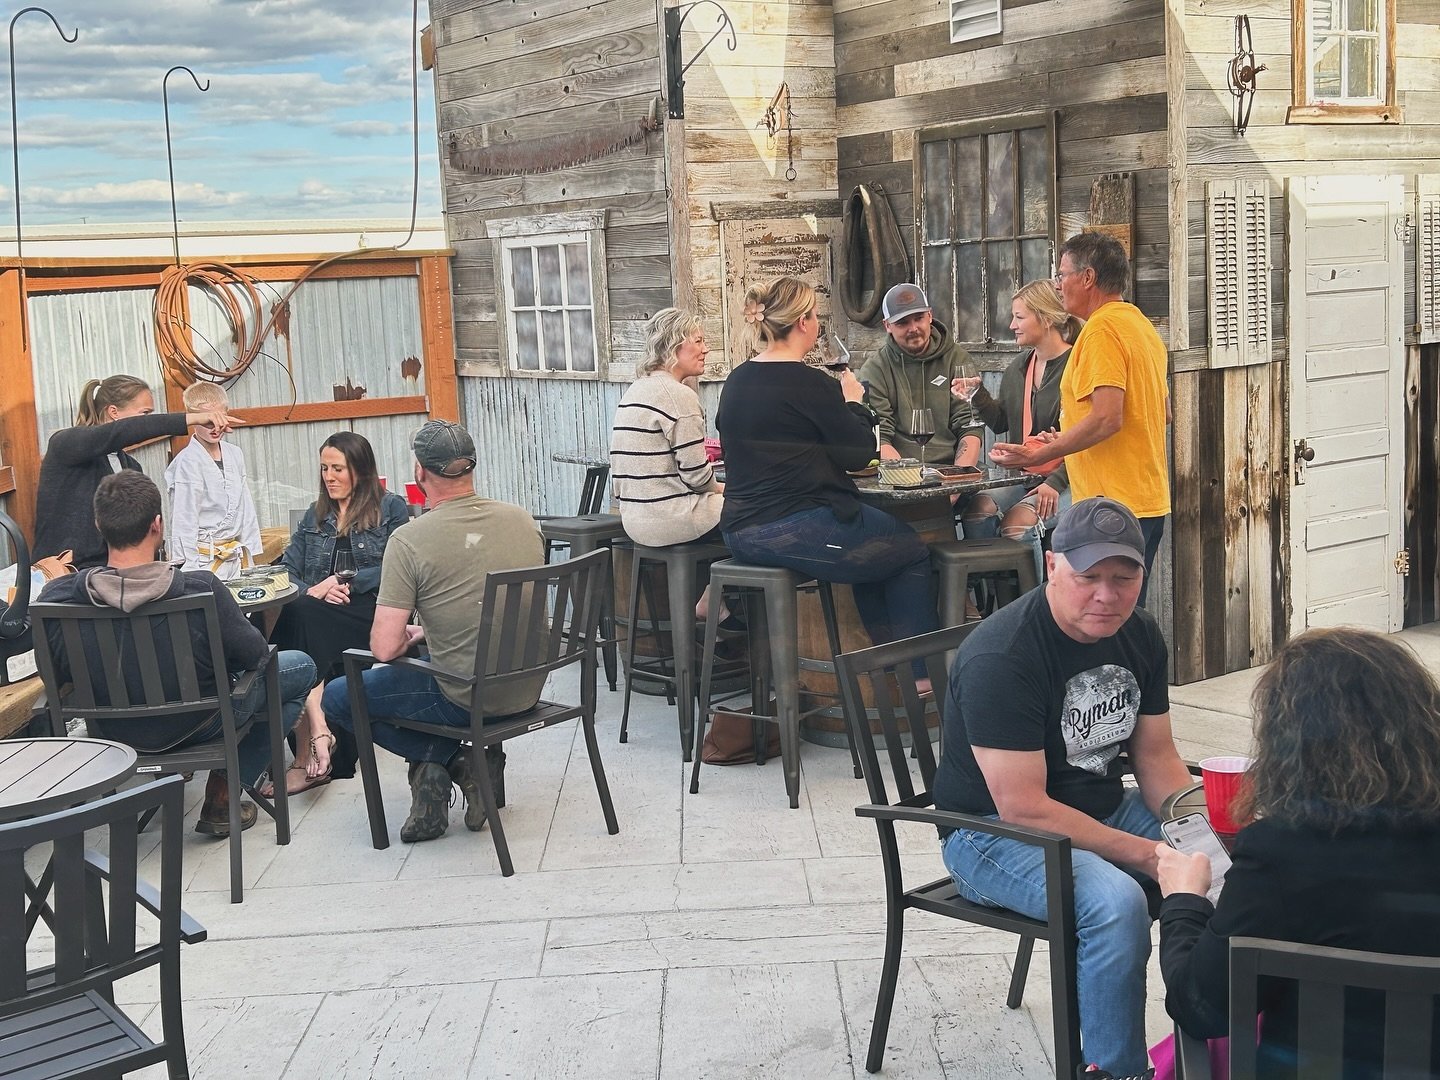 Last nights wine Wednesday was one for the books! Not our official patio opening, but we couldn&rsquo;t resist with the beautiful weather (and standing room only inside😉). Join us next week for more laughs, sips, and bites while we enjoy these beaut